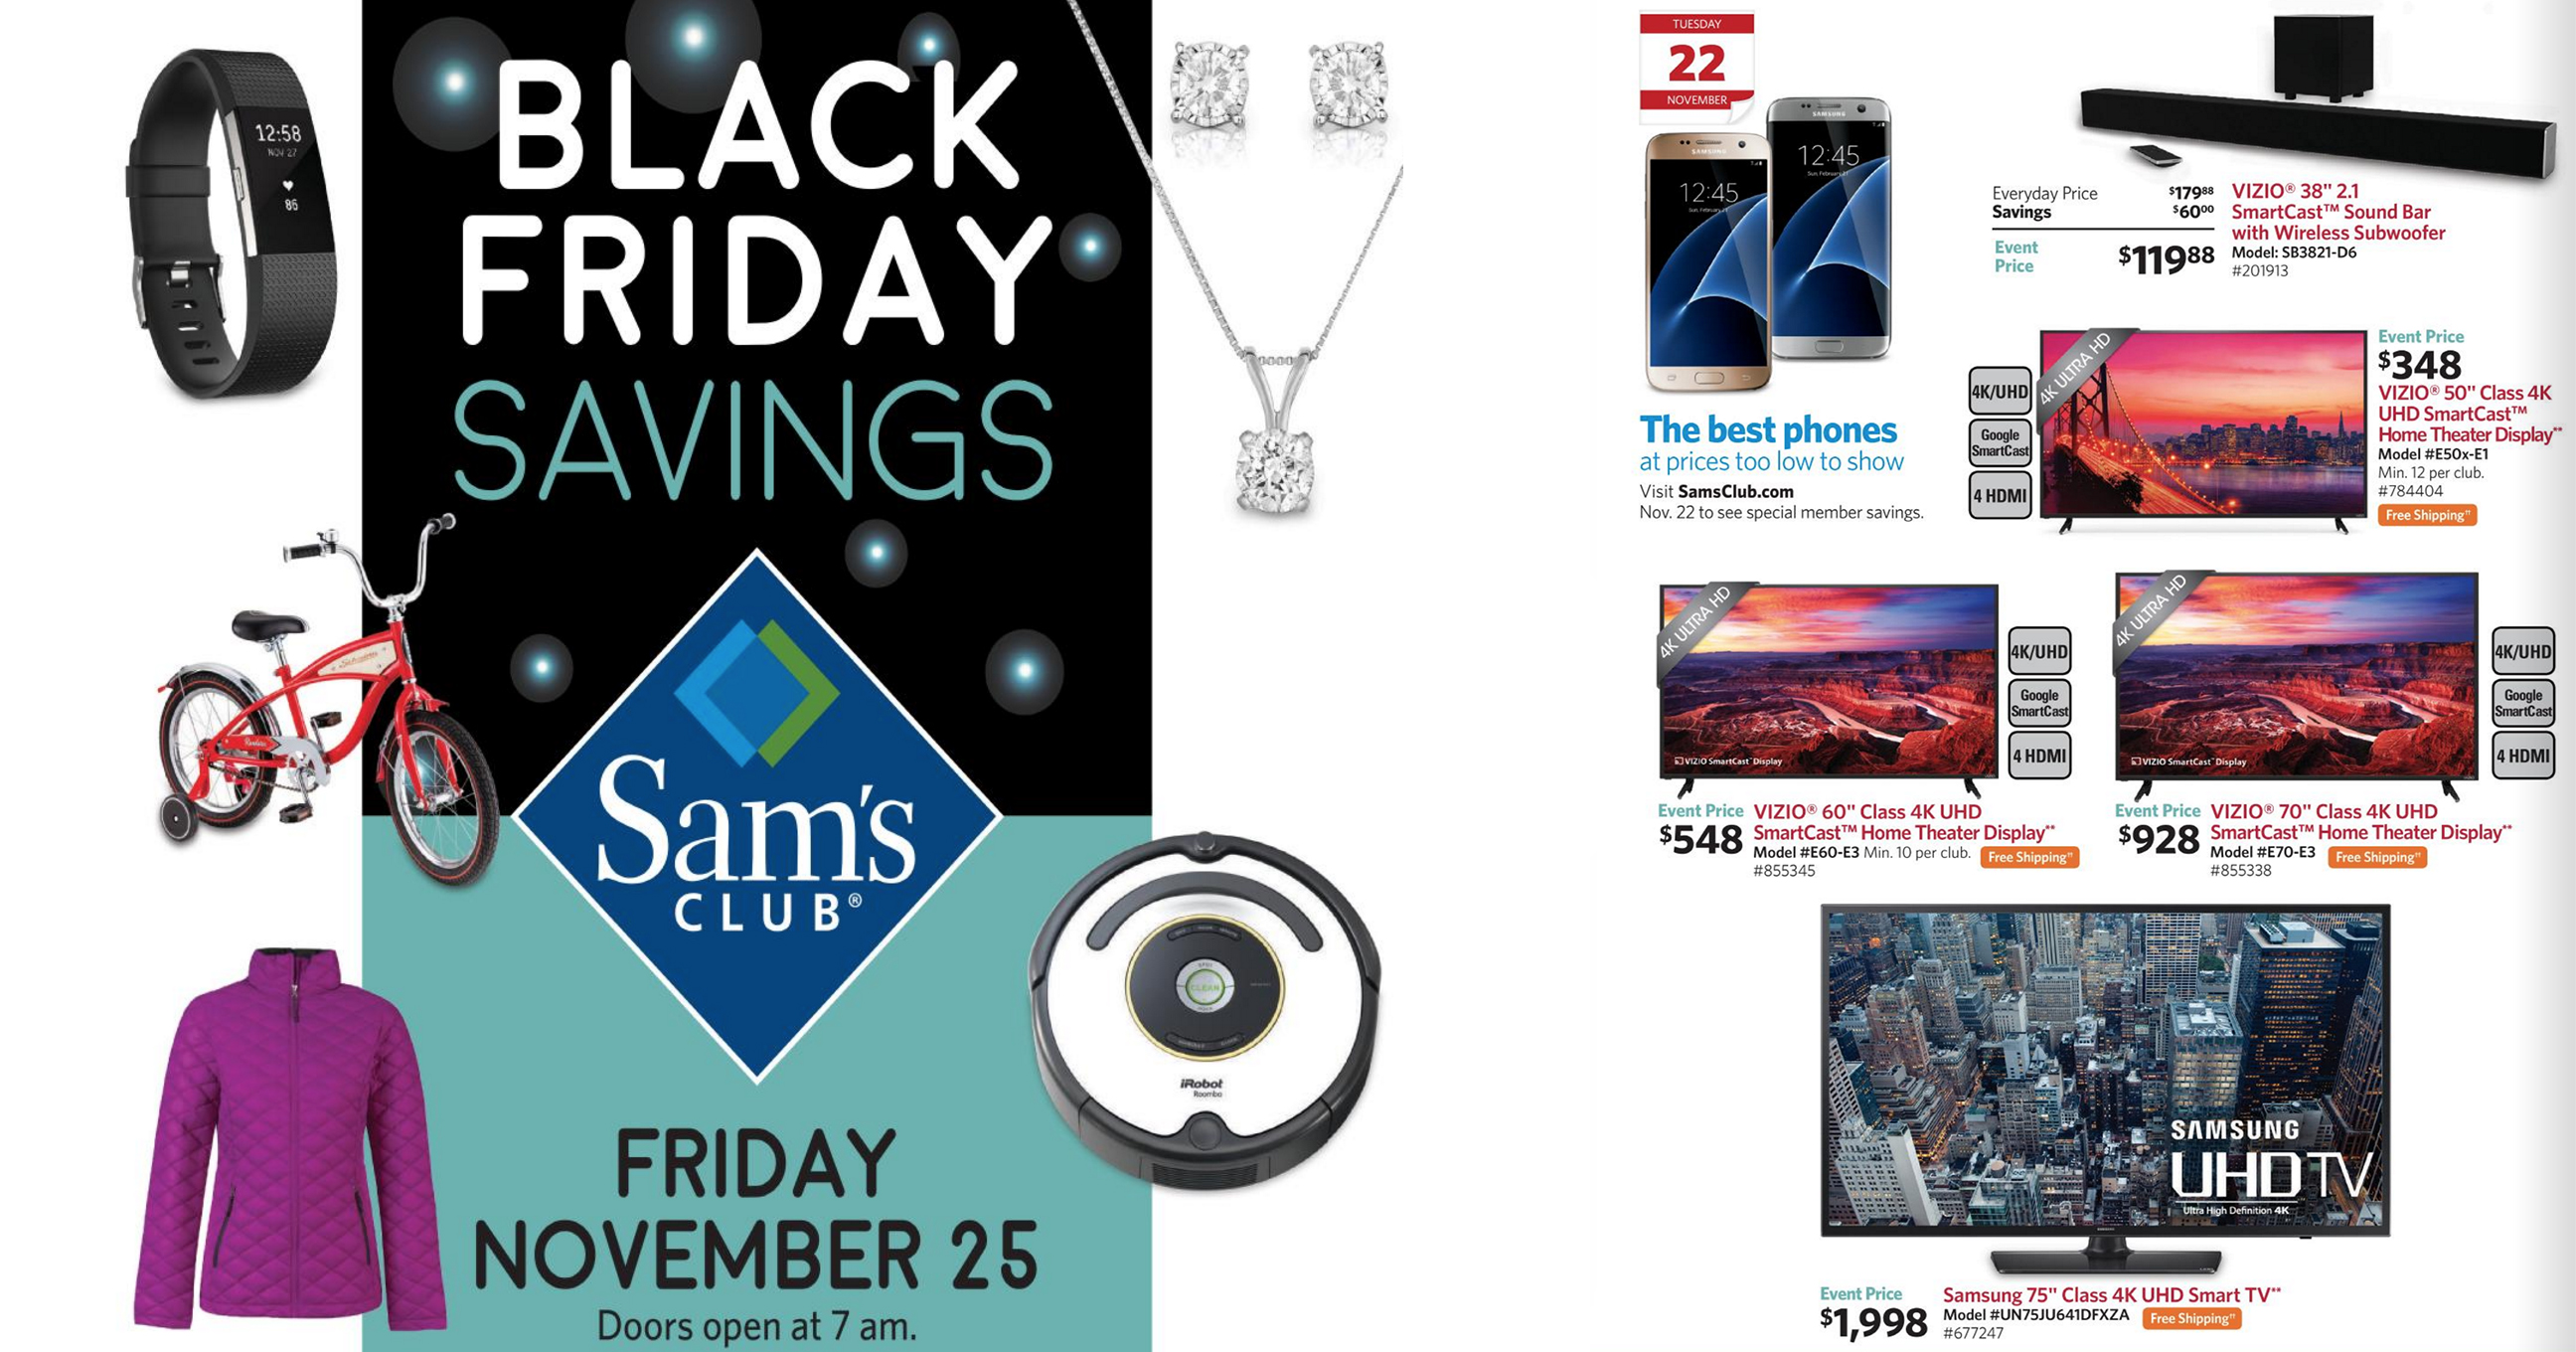 Sam's Club details its Black Friday plans plus a look at an oneday sale that nets 175